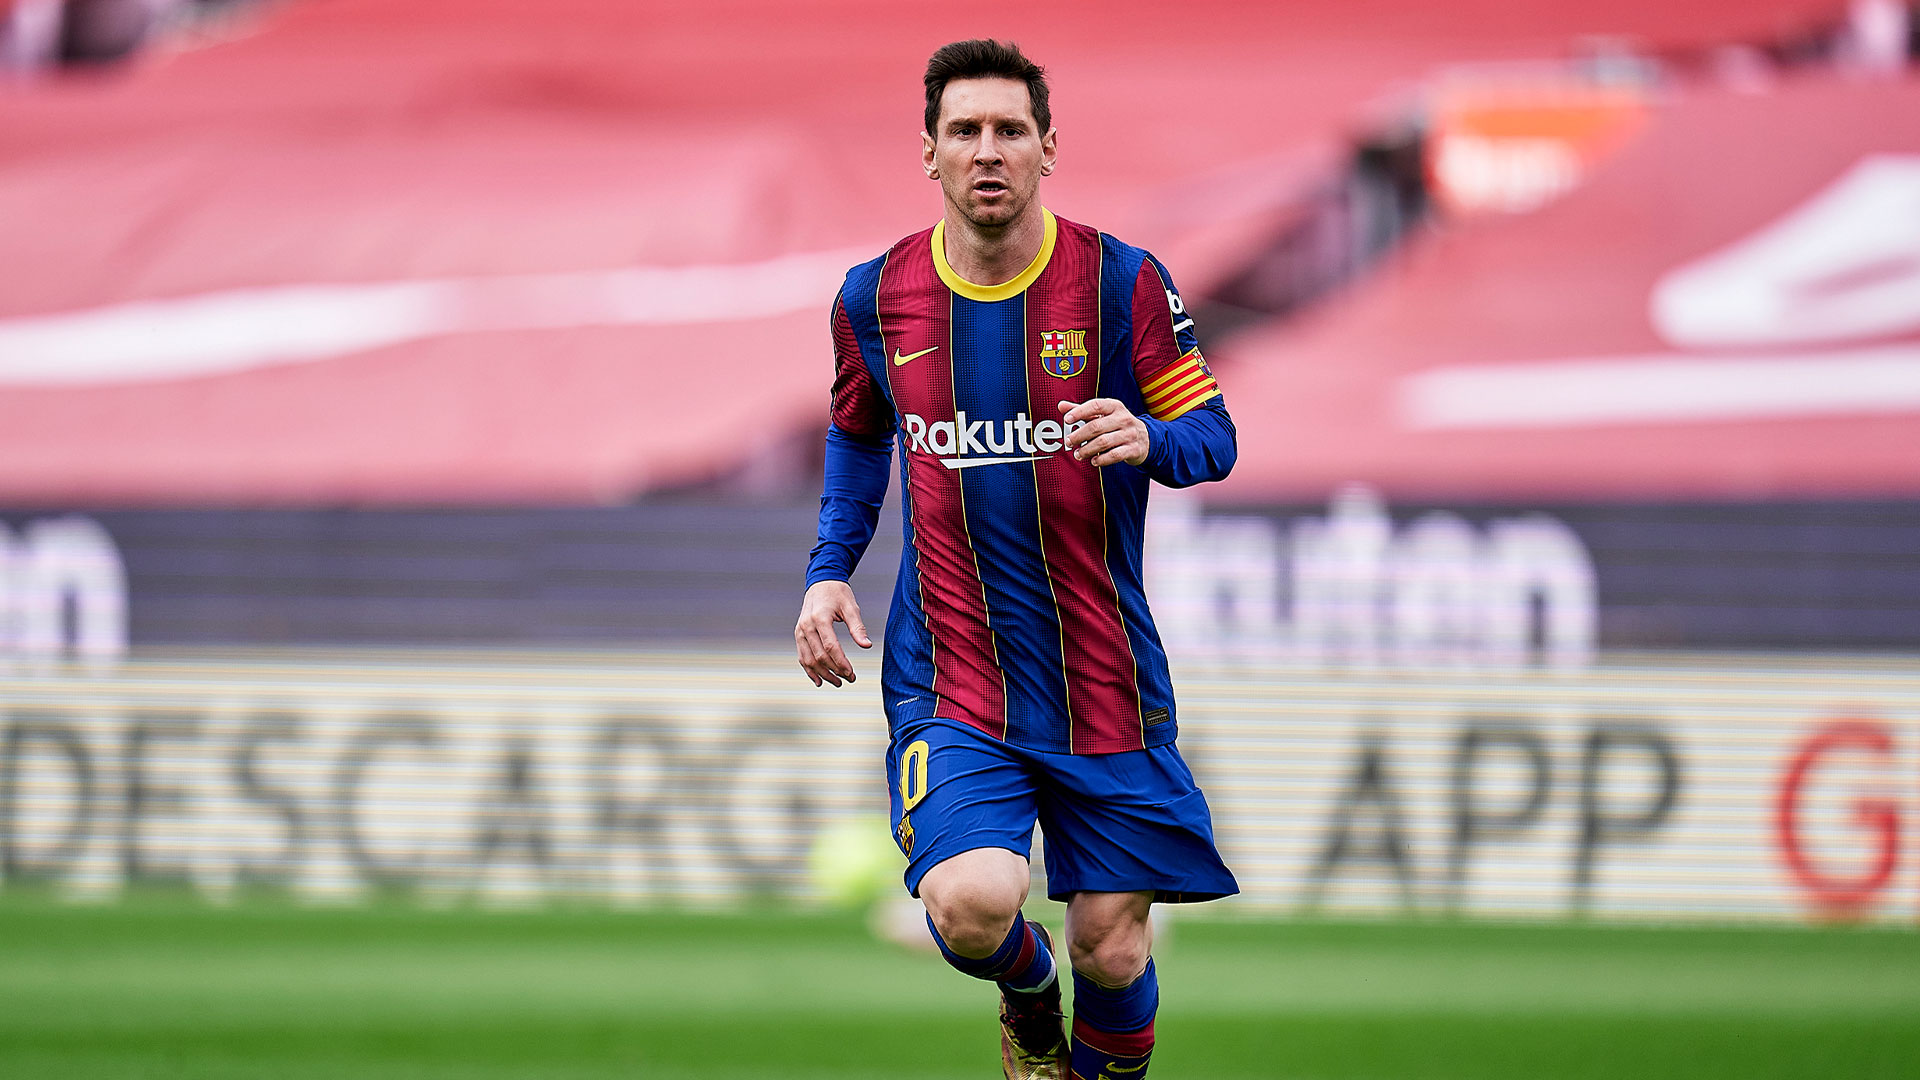 Leo Messi Is Making A Move to MLS!